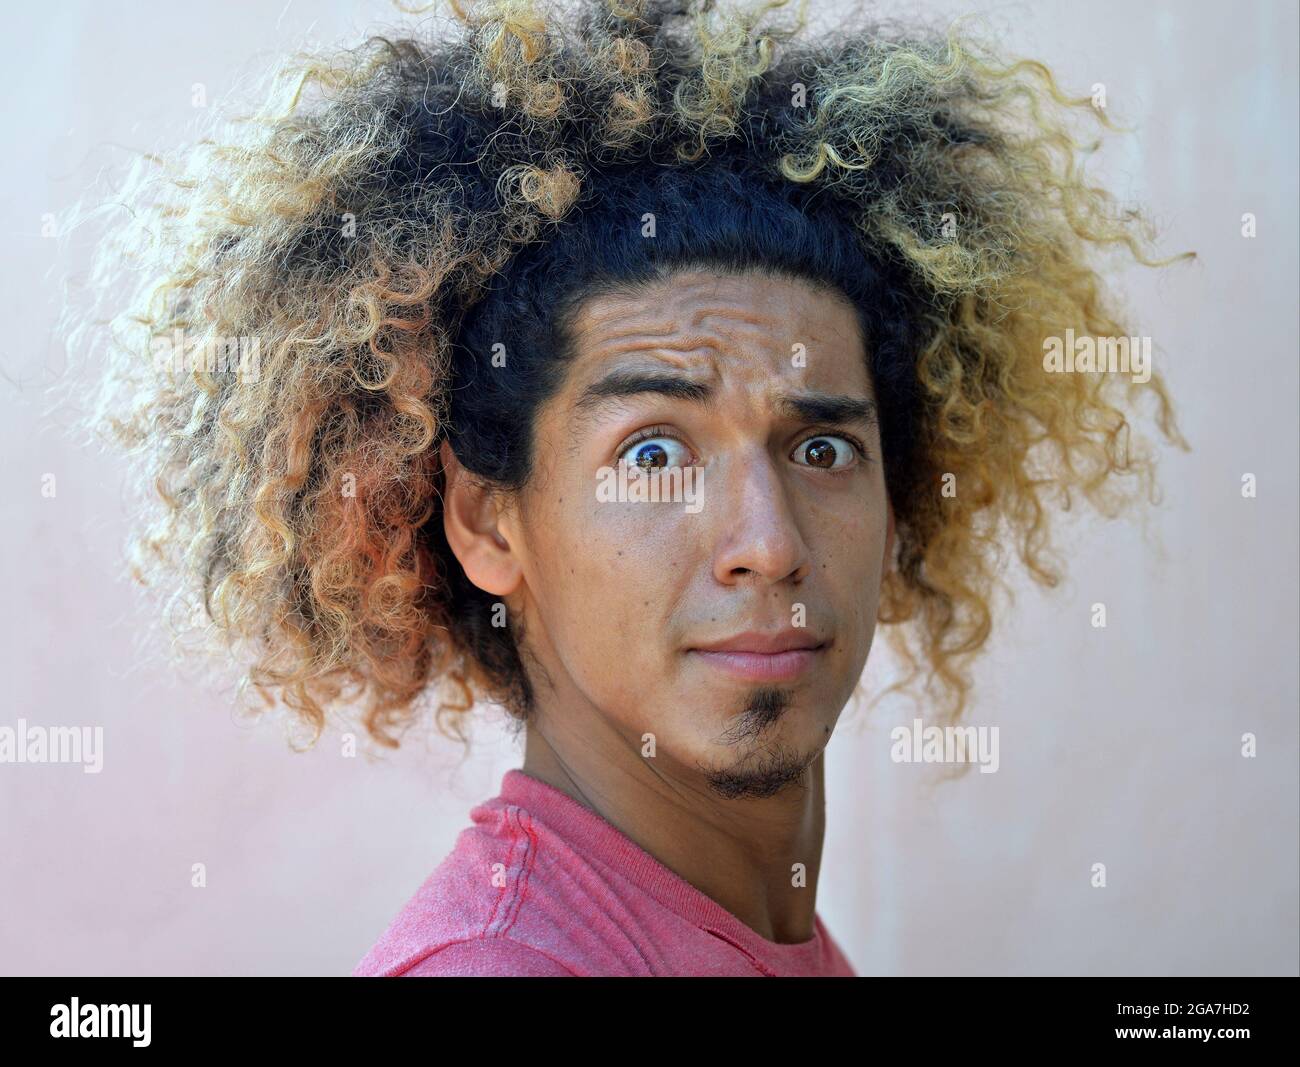 Young Latin American man with a shock of wild curly hair and blond dyed hair  ends stares surprised with big eyes and wrinkled forehead at the camera  Stock Photo - Alamy